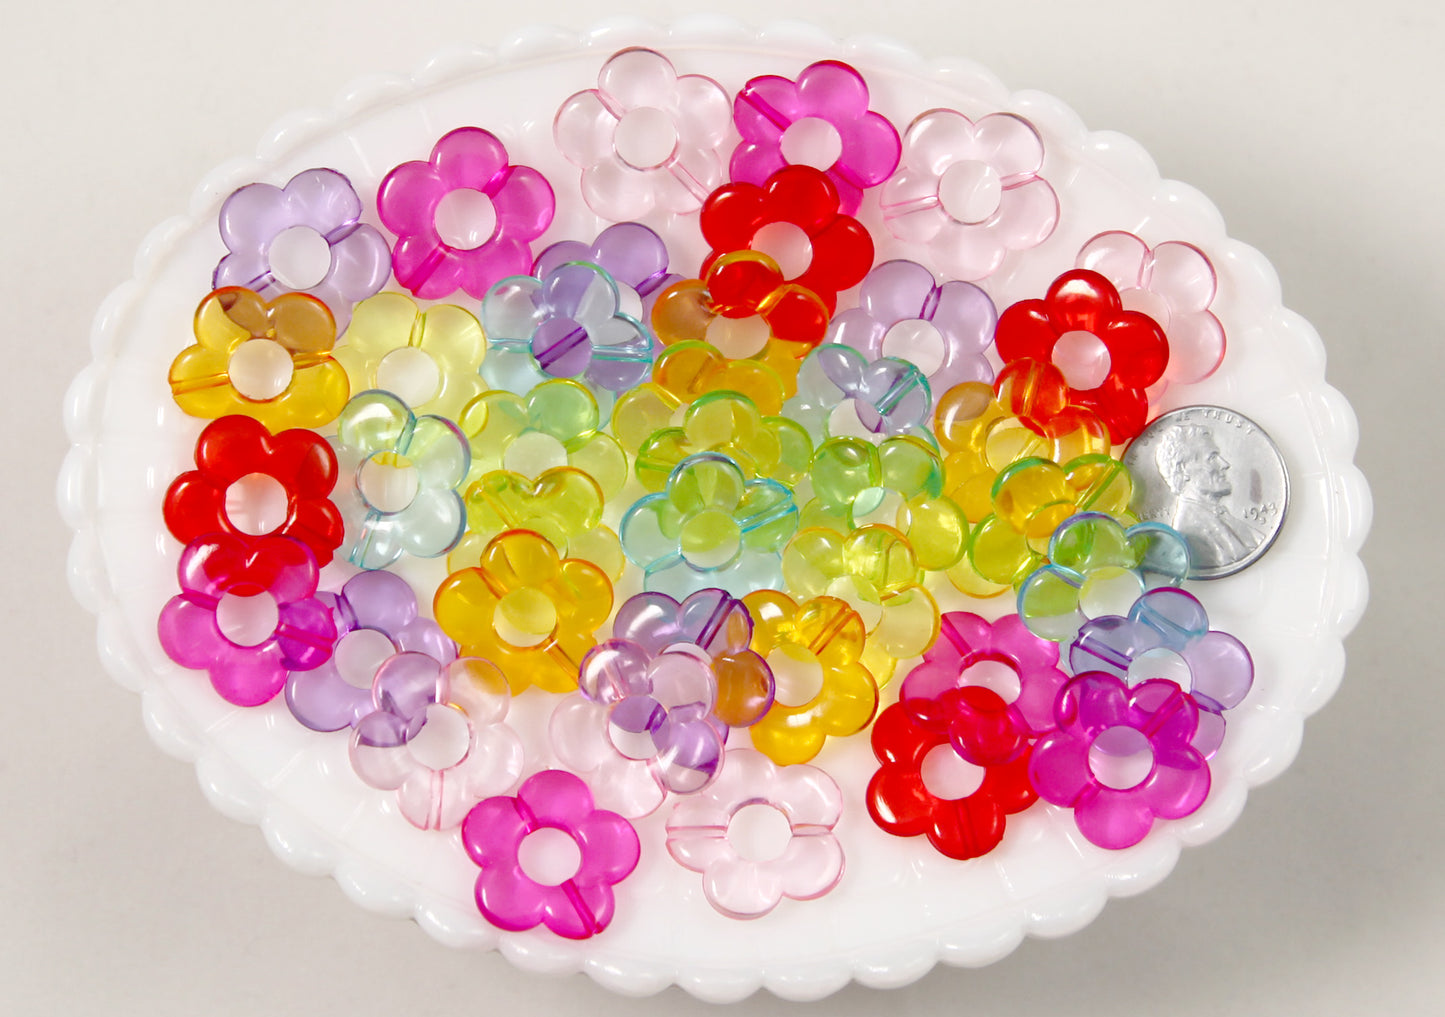 Flower Beads - 18mm Transparent Outline Flower Frame Iridescent Color Plastic Acrylic or Resin Beads – 80 pc set